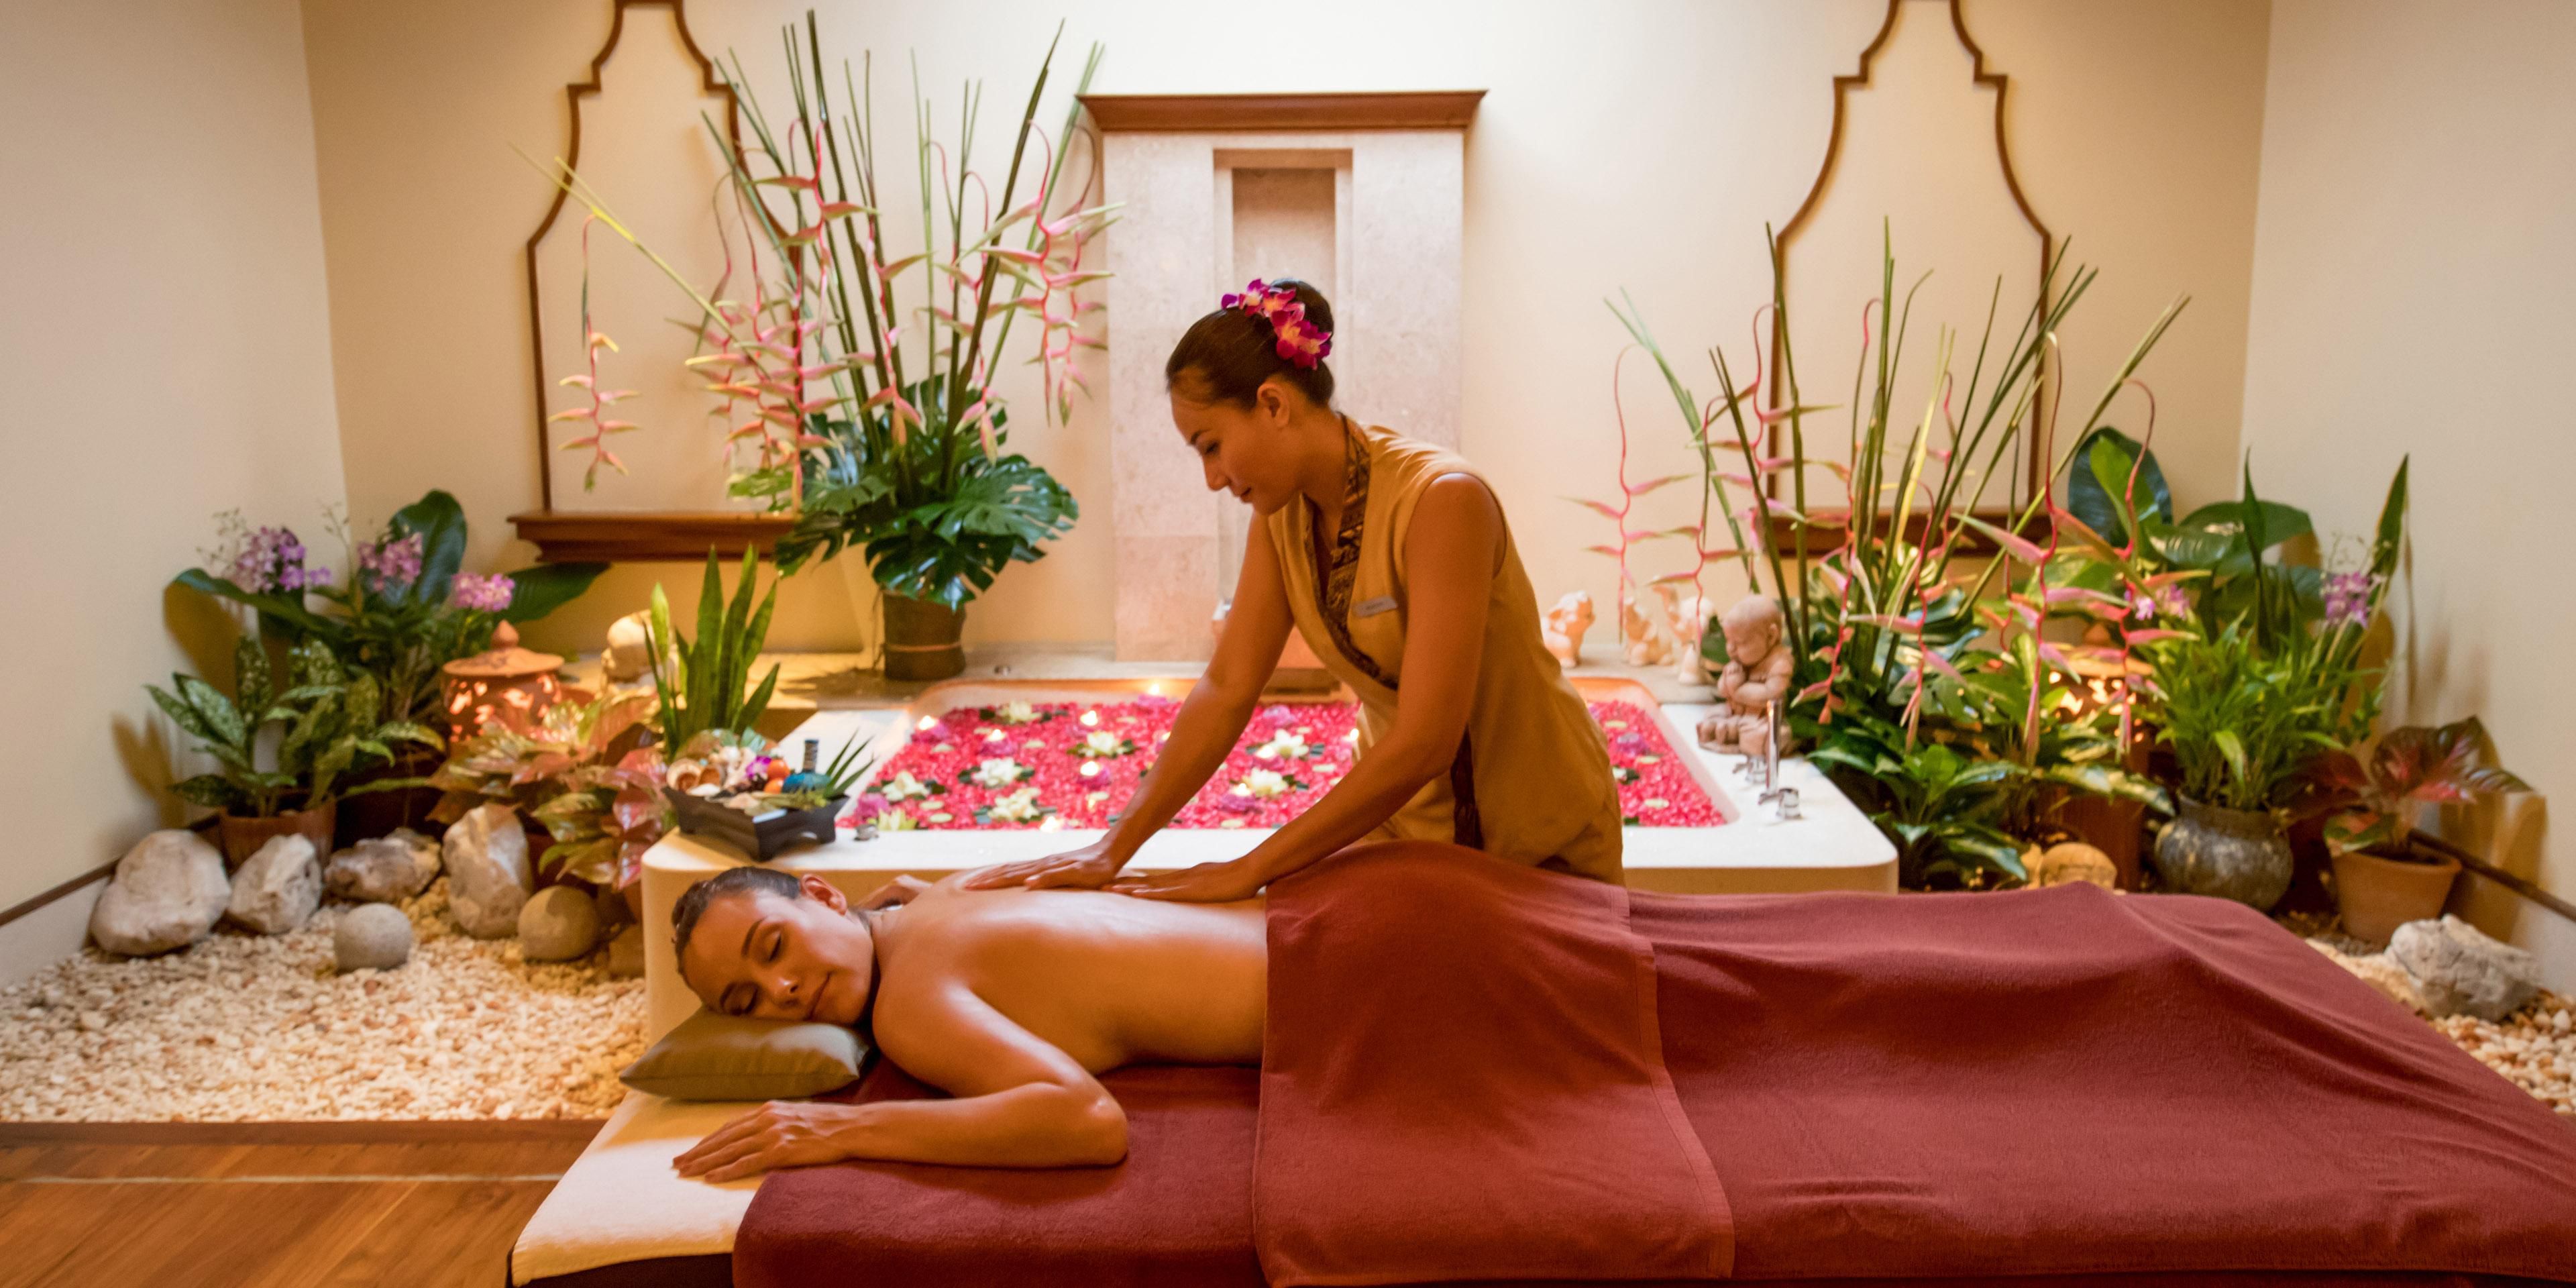 Featuring organic botanicals for facial and body treatments, Amburaya Spa has six private suites perfect for both couples and individuals. Enjoy signature treatments from our experienced masseuses, including the Amburaya Embrace--a full-body massage that features the combination of five massage therapies for a truly relaxing experience.